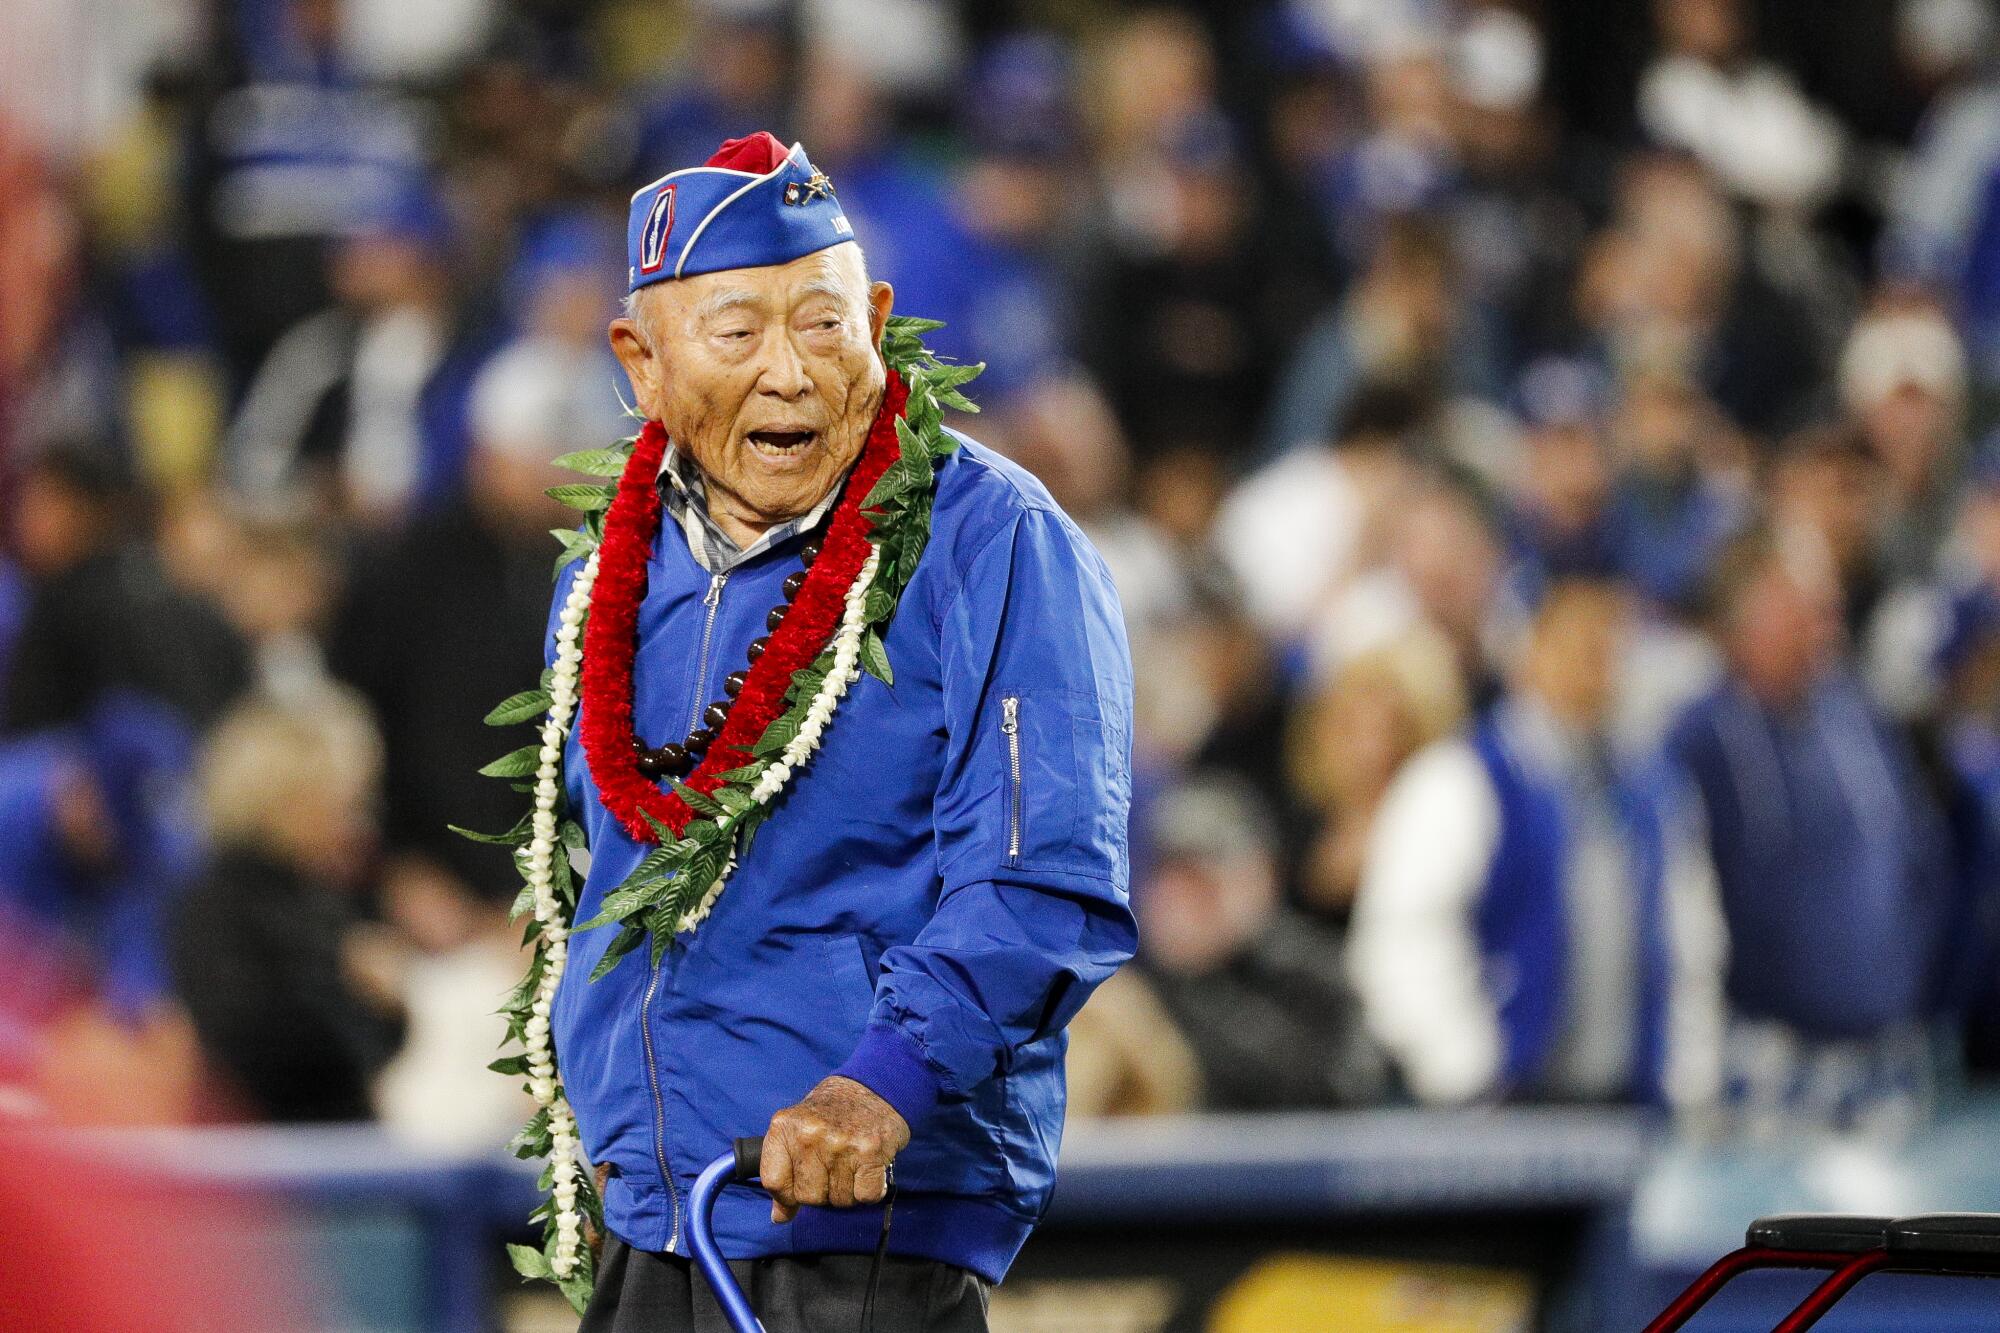 An elderly man wearing a windbreaker and military cap with leis around his neck and carrying a cane smiles